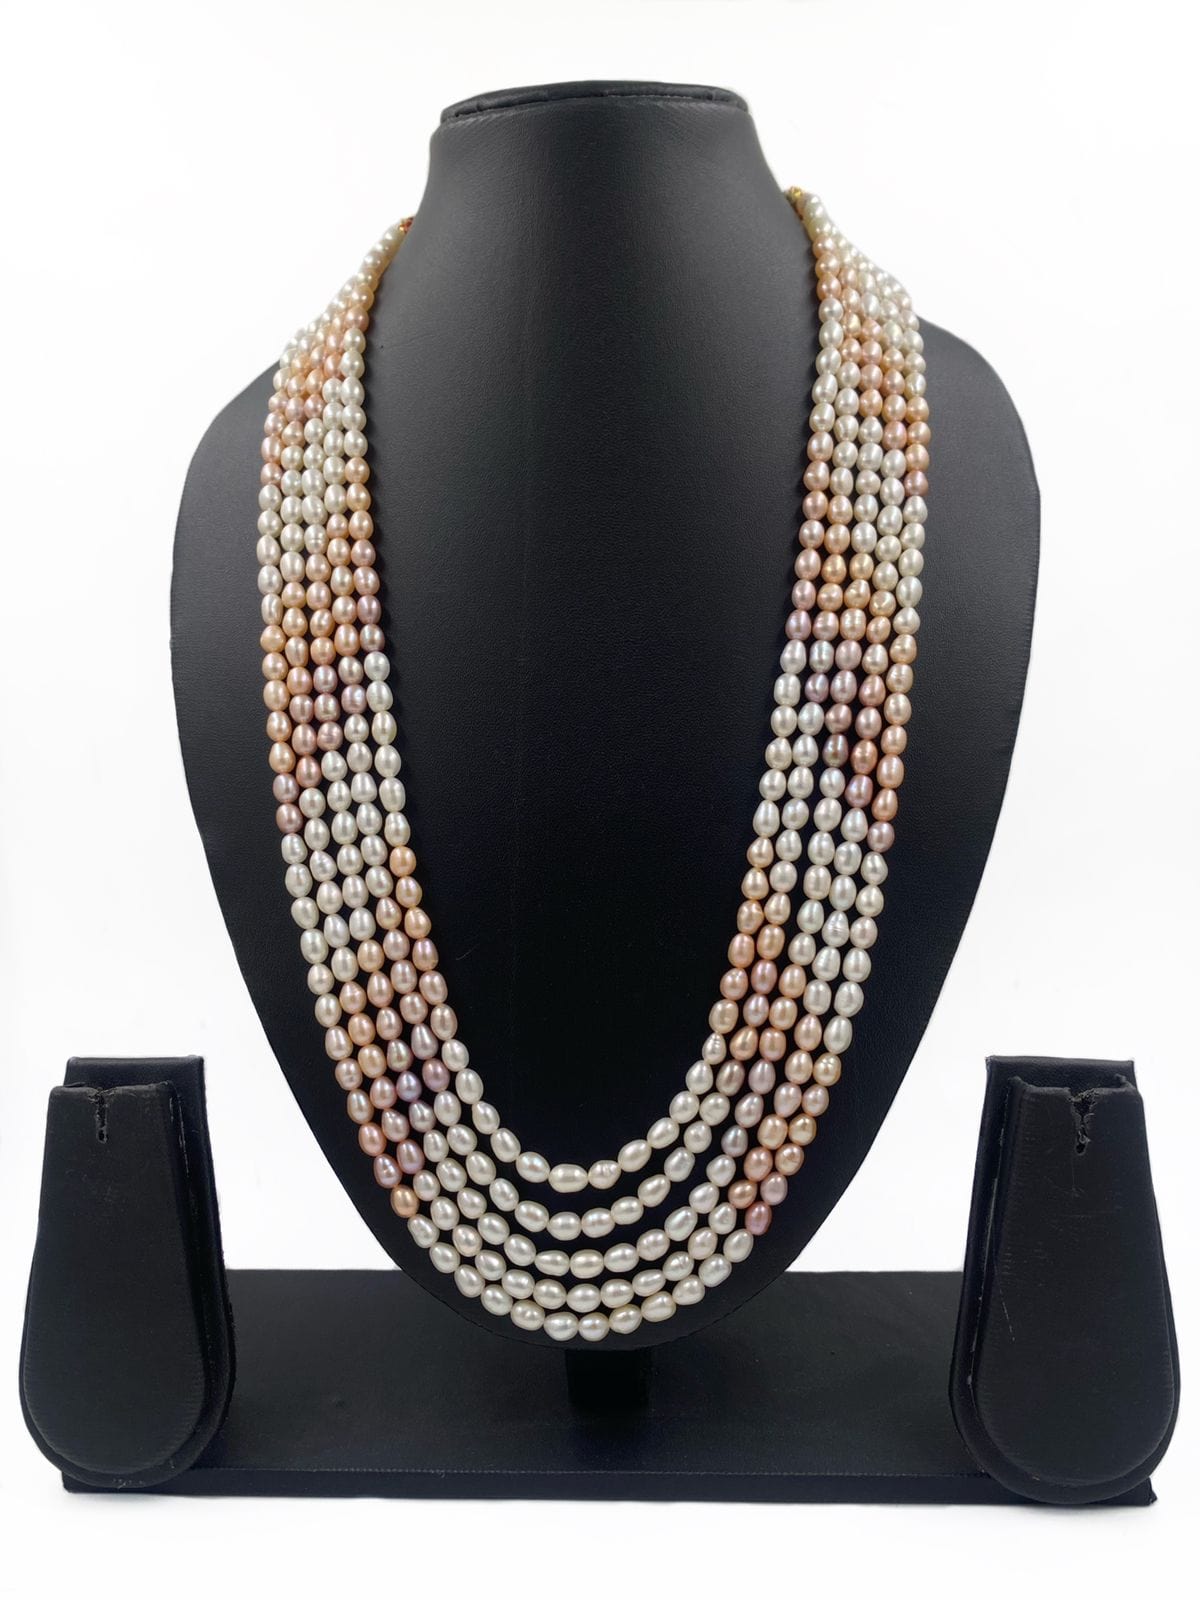 Long Multilayered Unisex Real Hyderabadi Pearl Beads Necklace By Gehna Shop Beads Jewellery